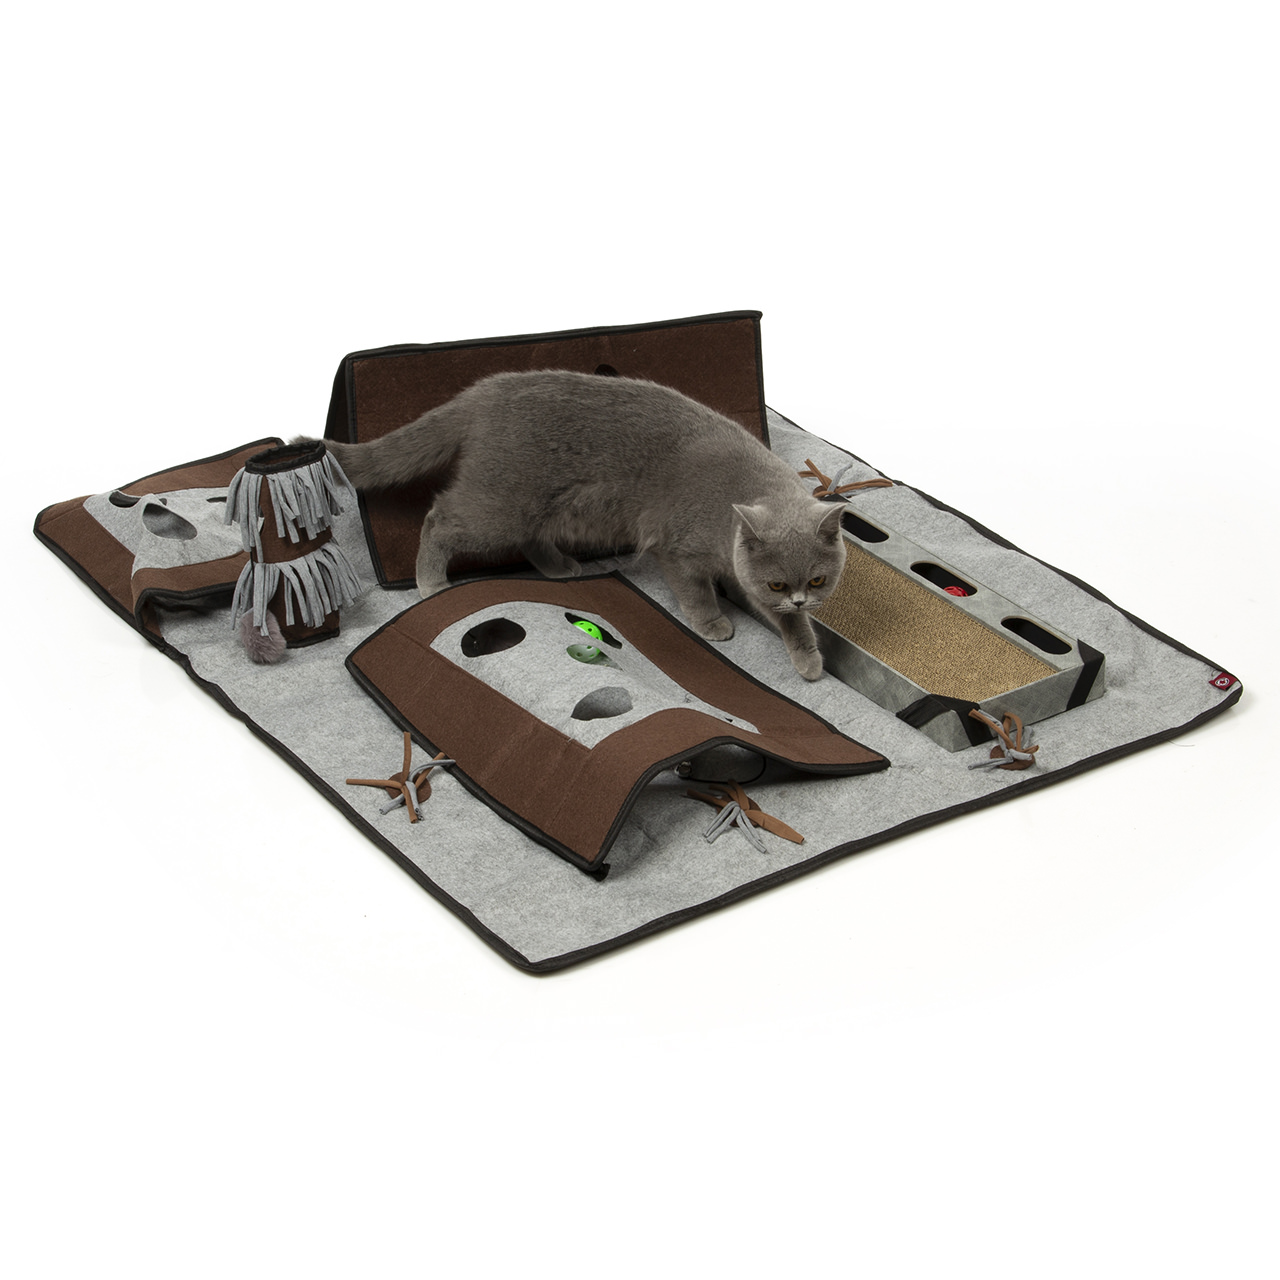 Play carpet XXL Activity for cats